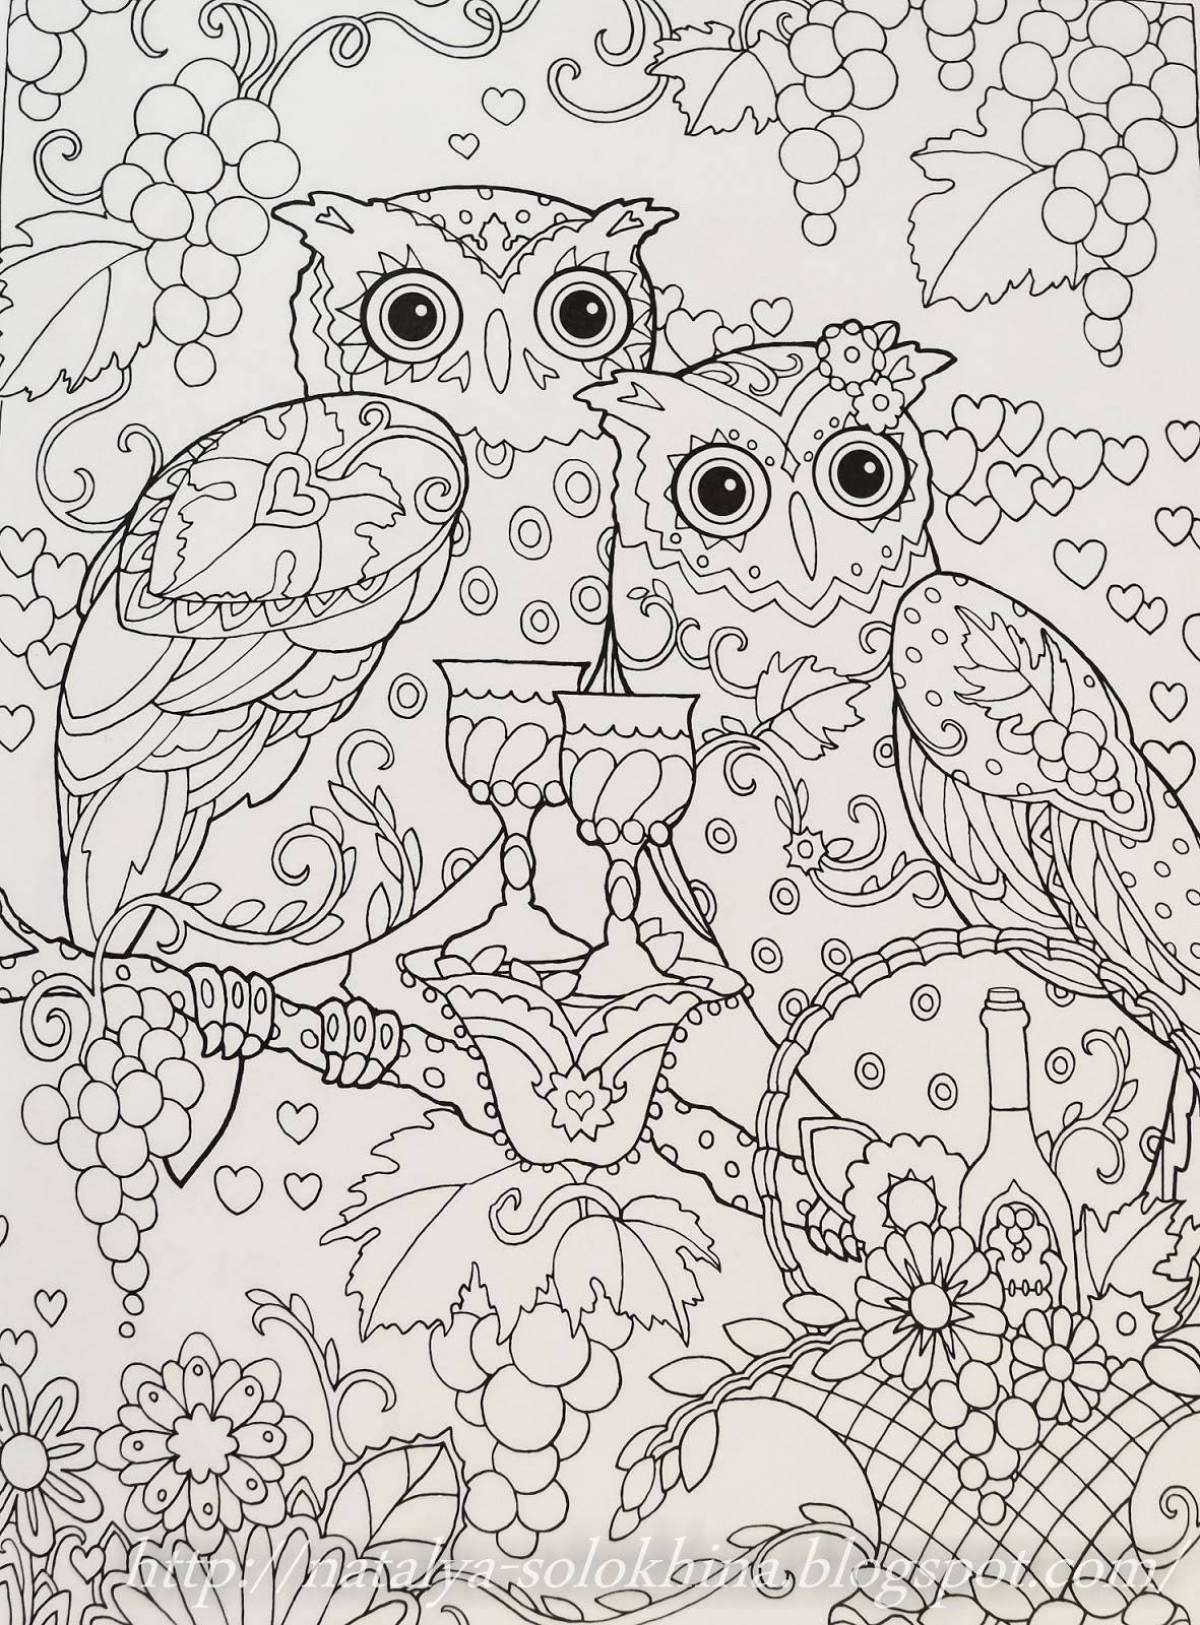 Adorable coloring book with fine details